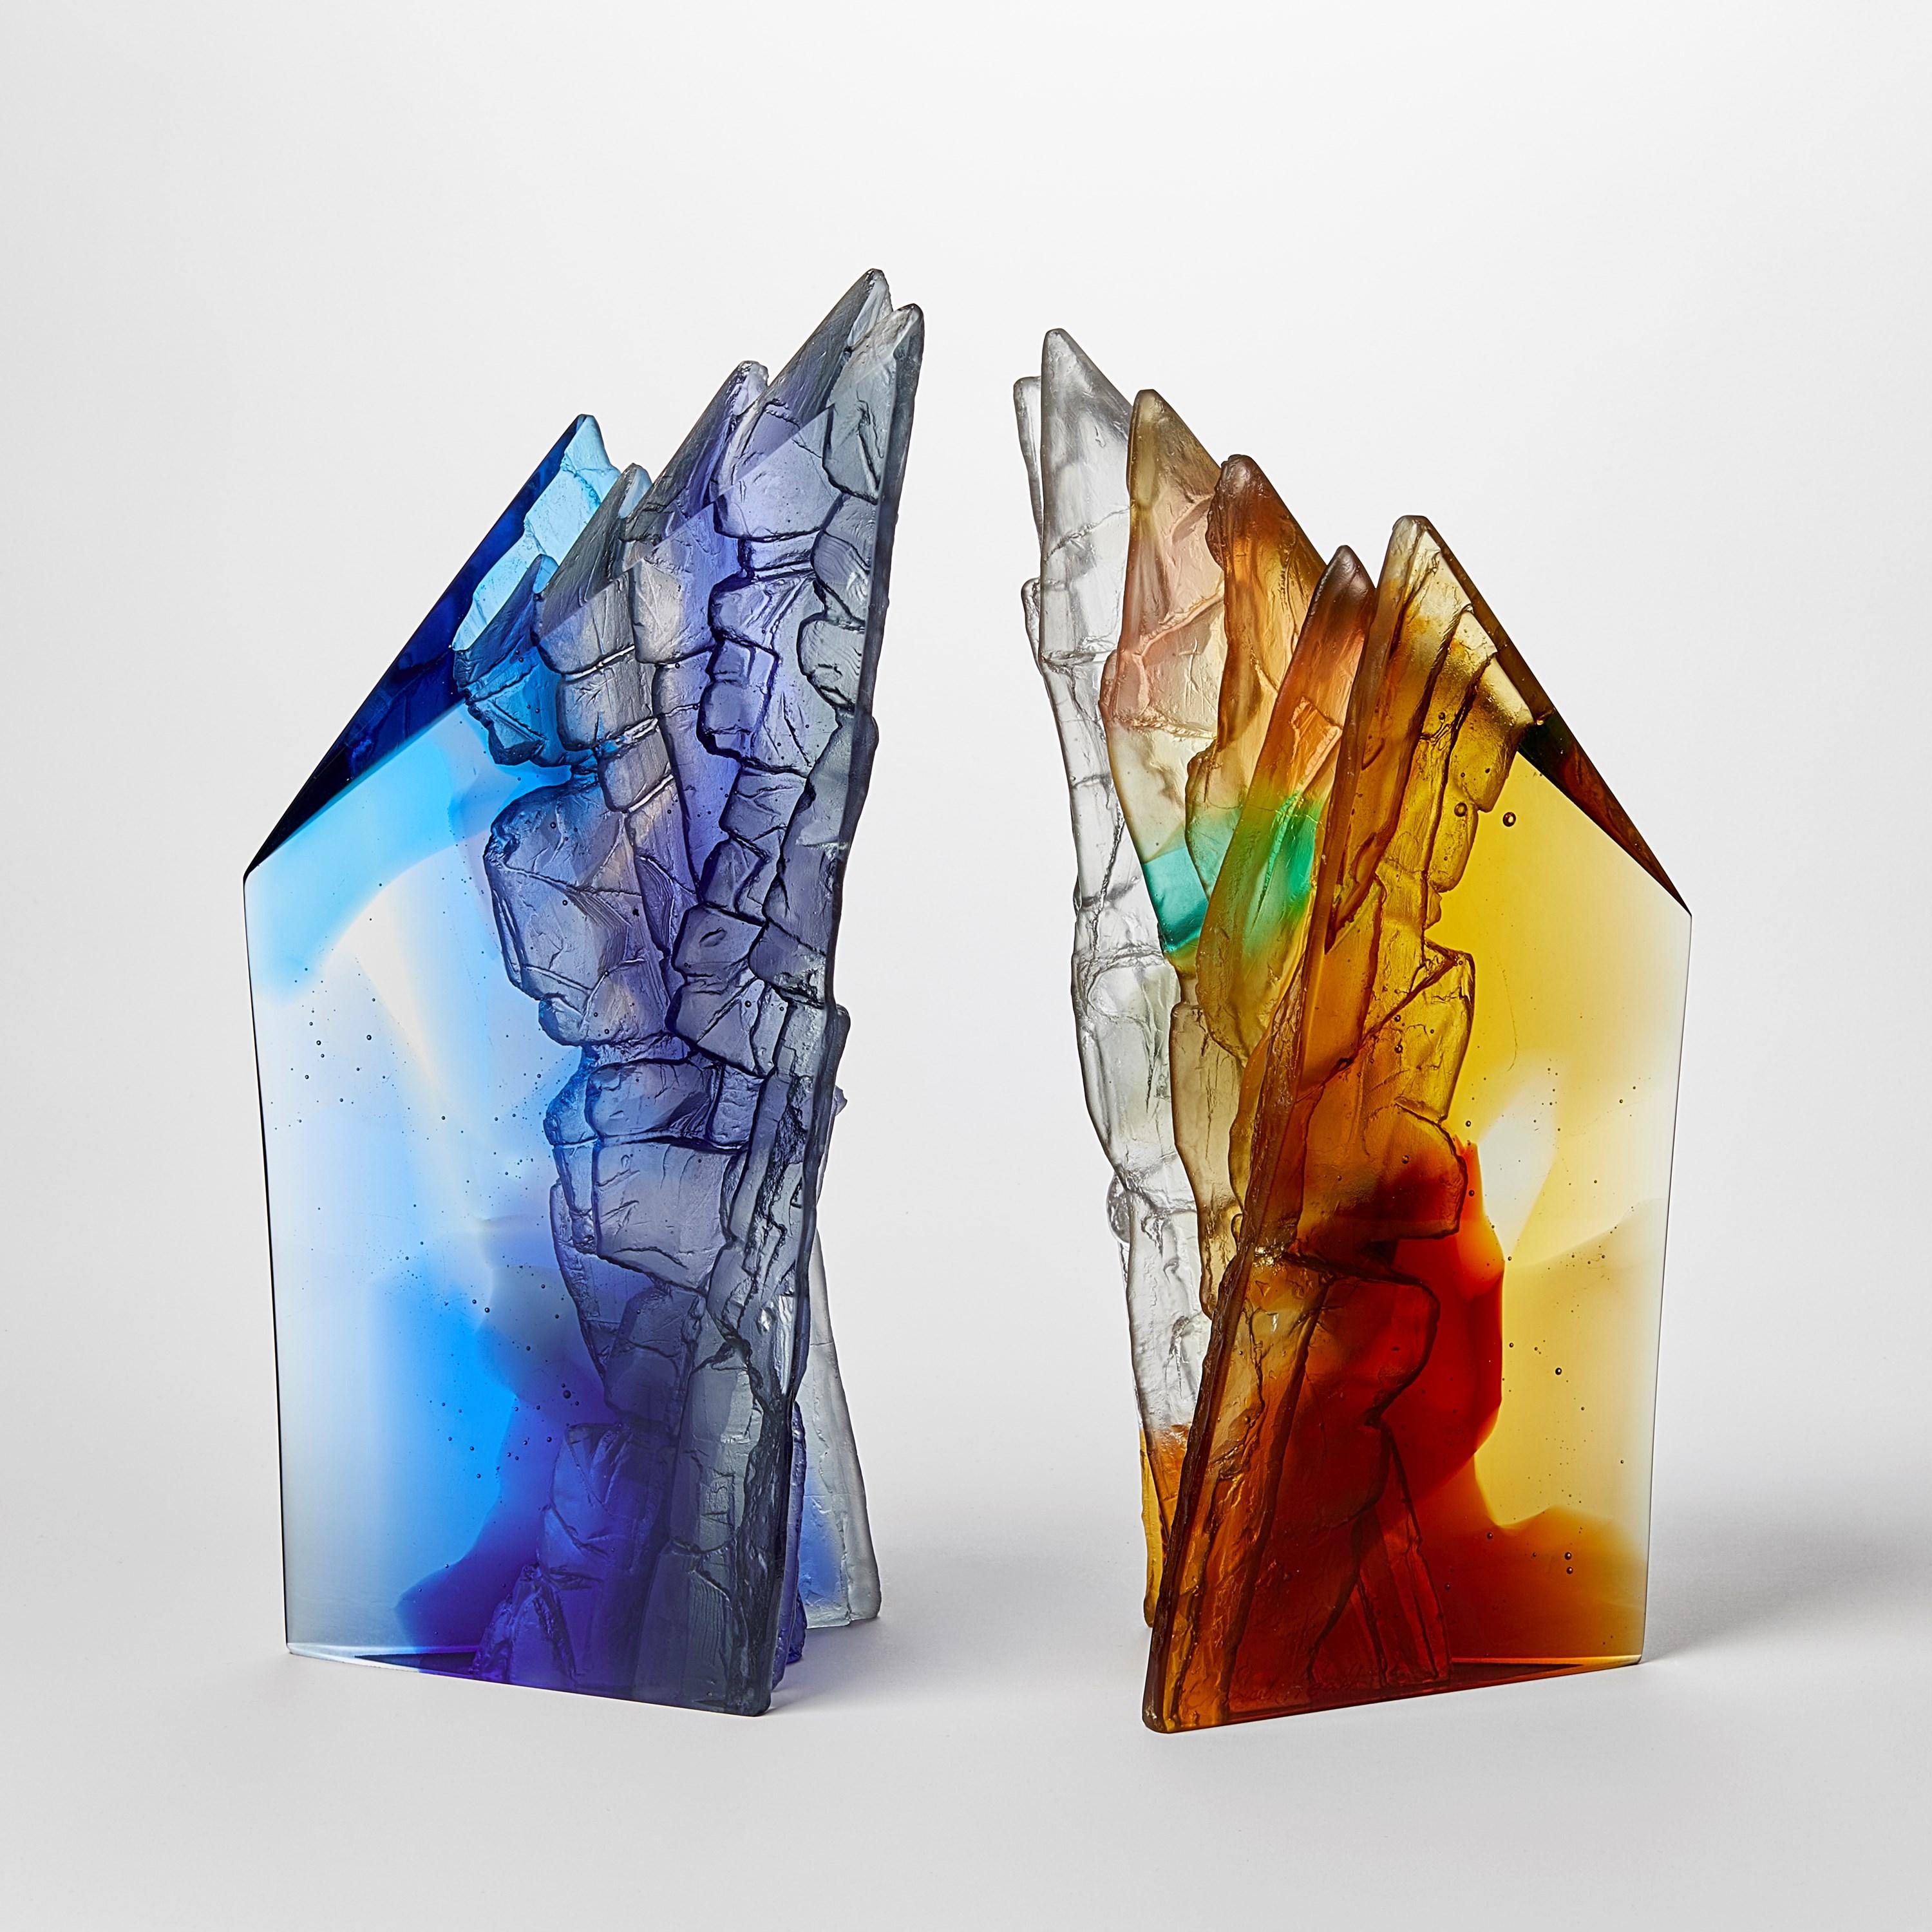 Contemporary Deep Blue Cliff II, a textured cliff inspired glass sculpture by Crispian Heath For Sale